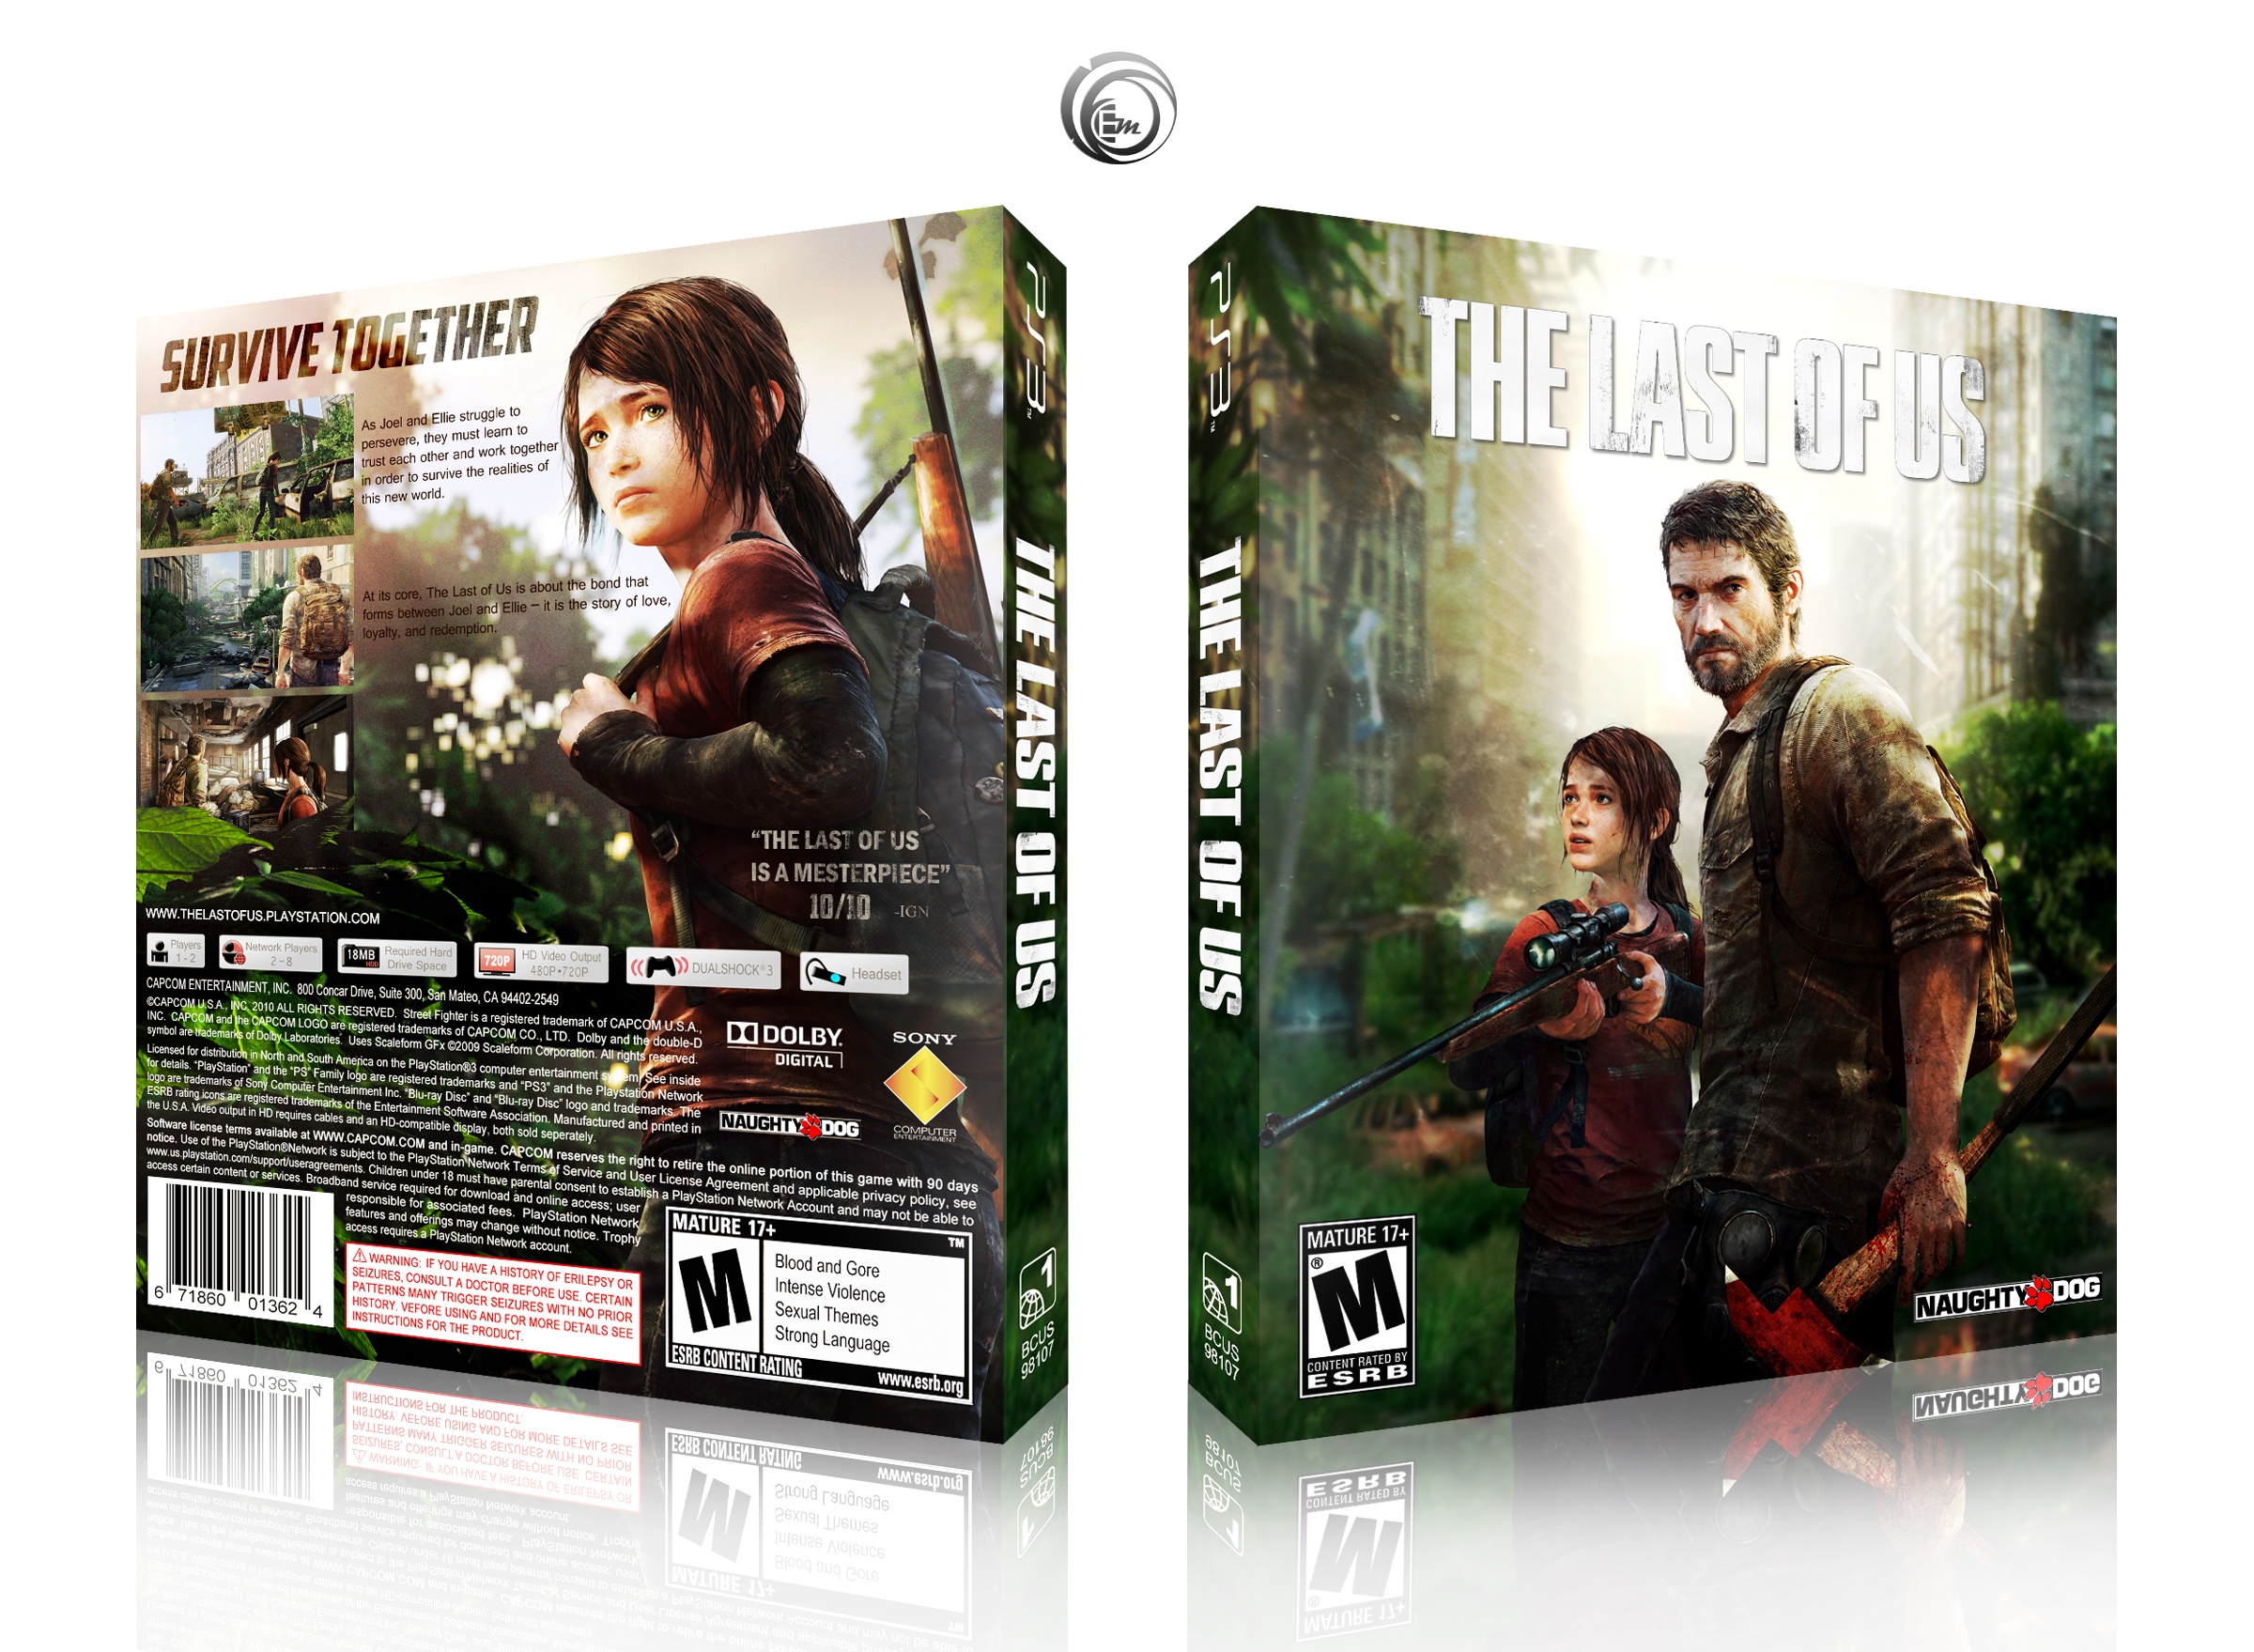 The Last of Us box cover